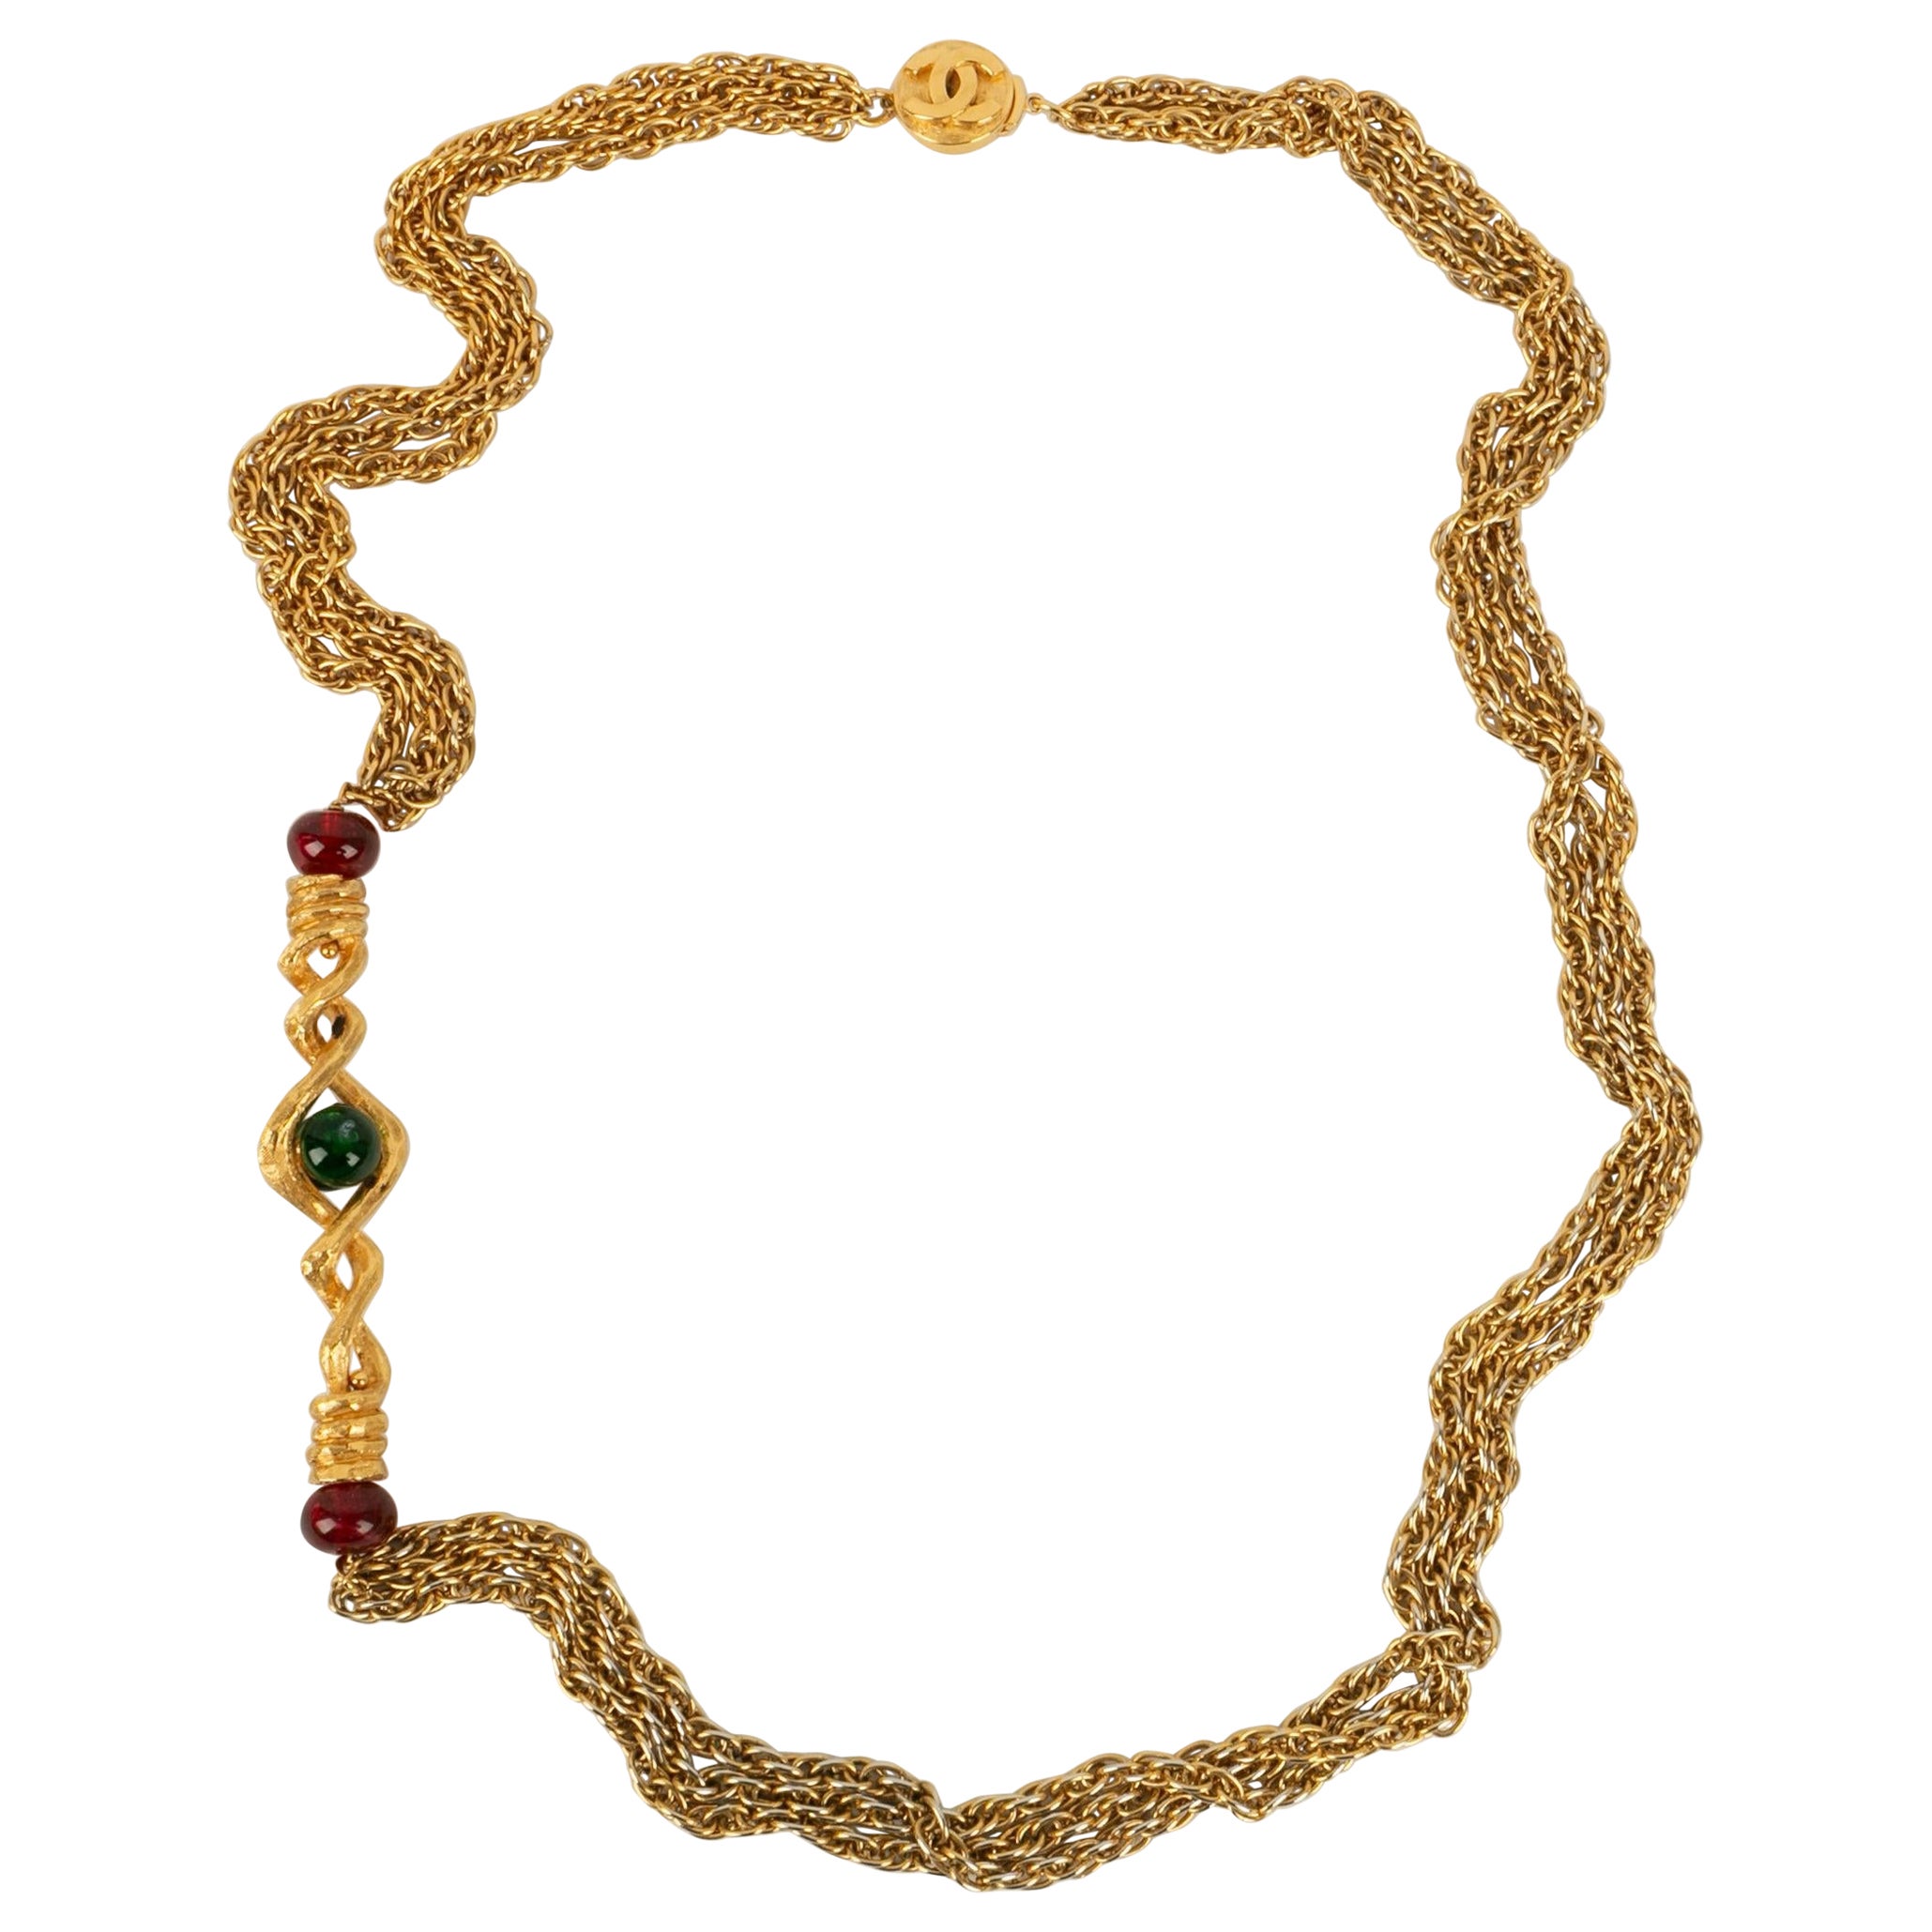 Chanel Necklace in Gold-Plated Metal and Colored Glass Pearls